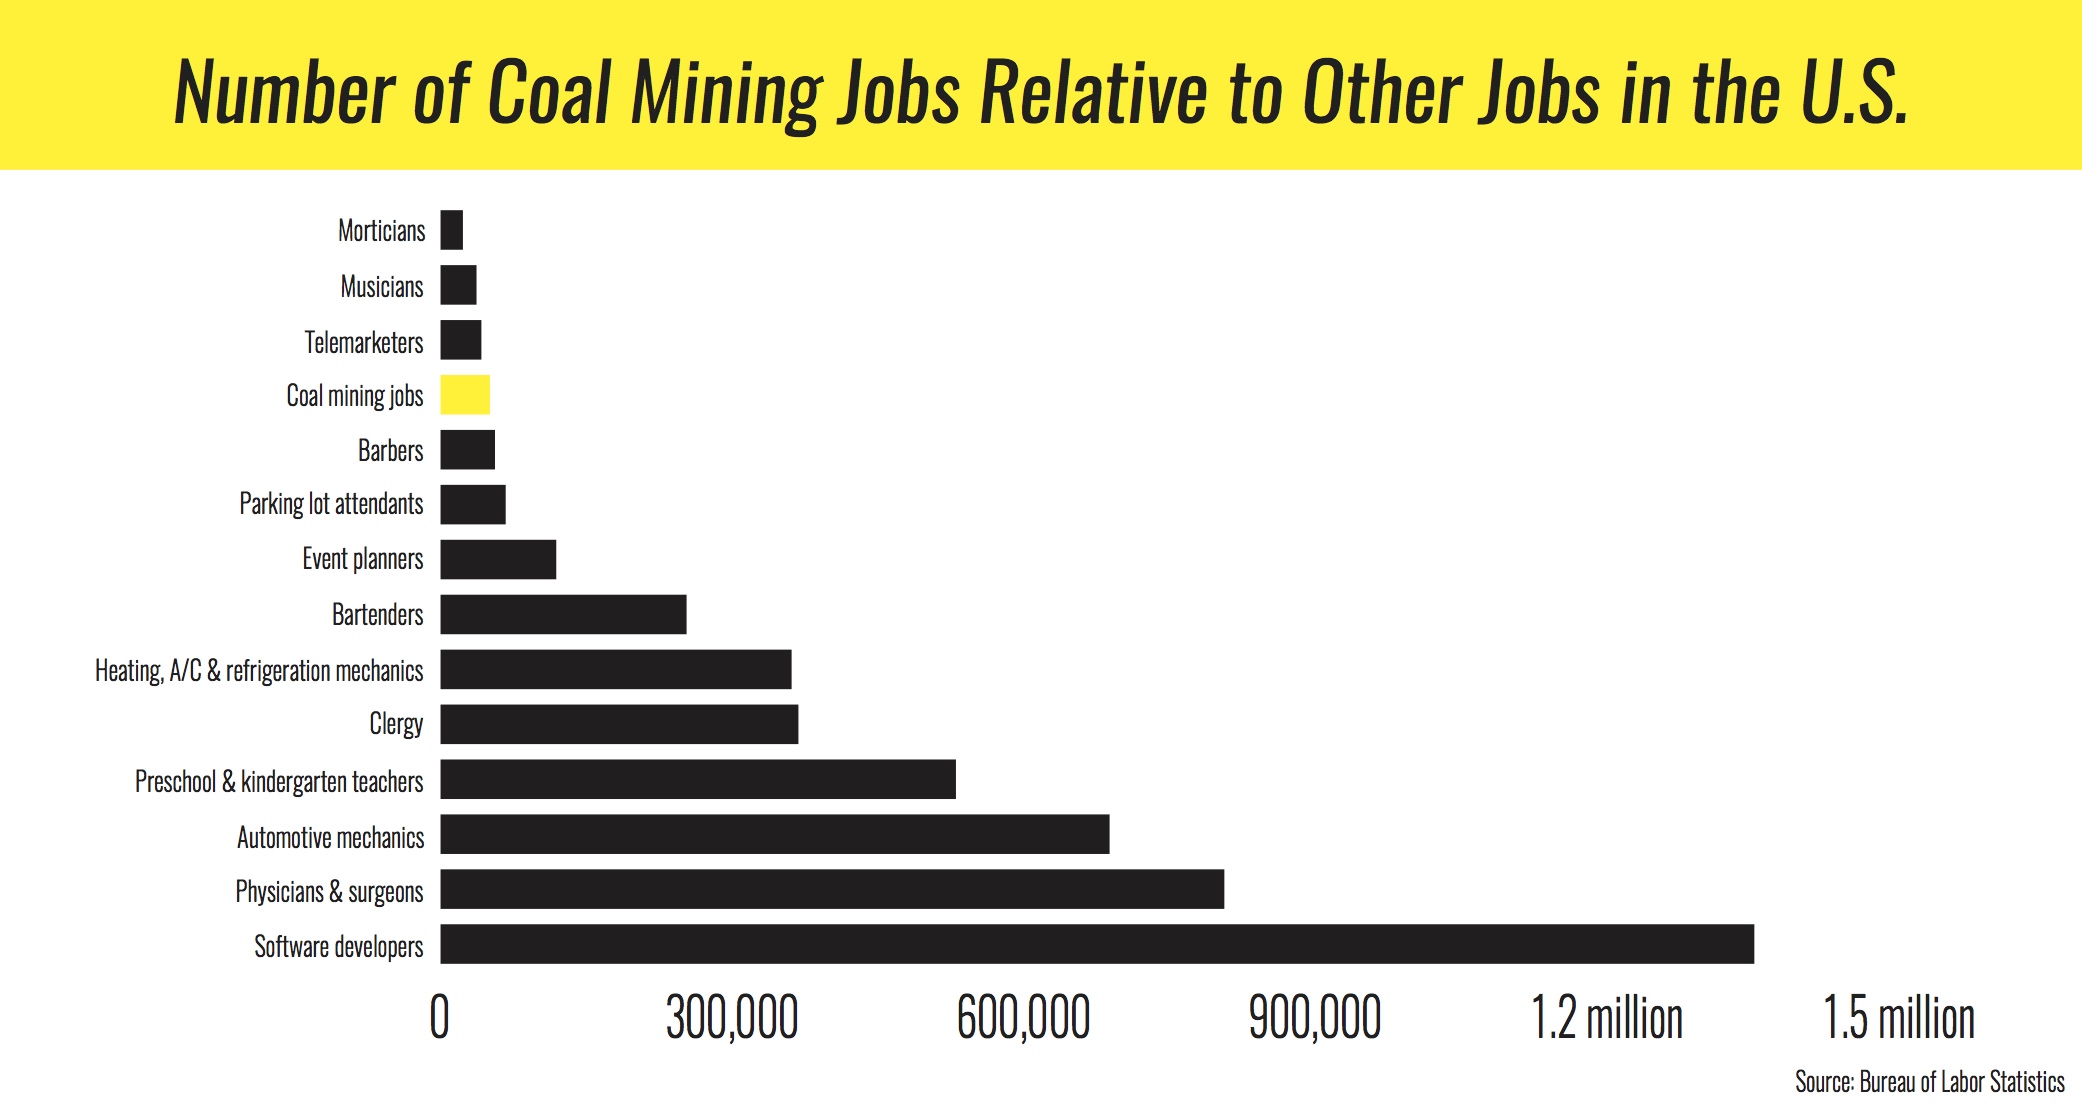 How common are coal industry deaths in Kentucky?